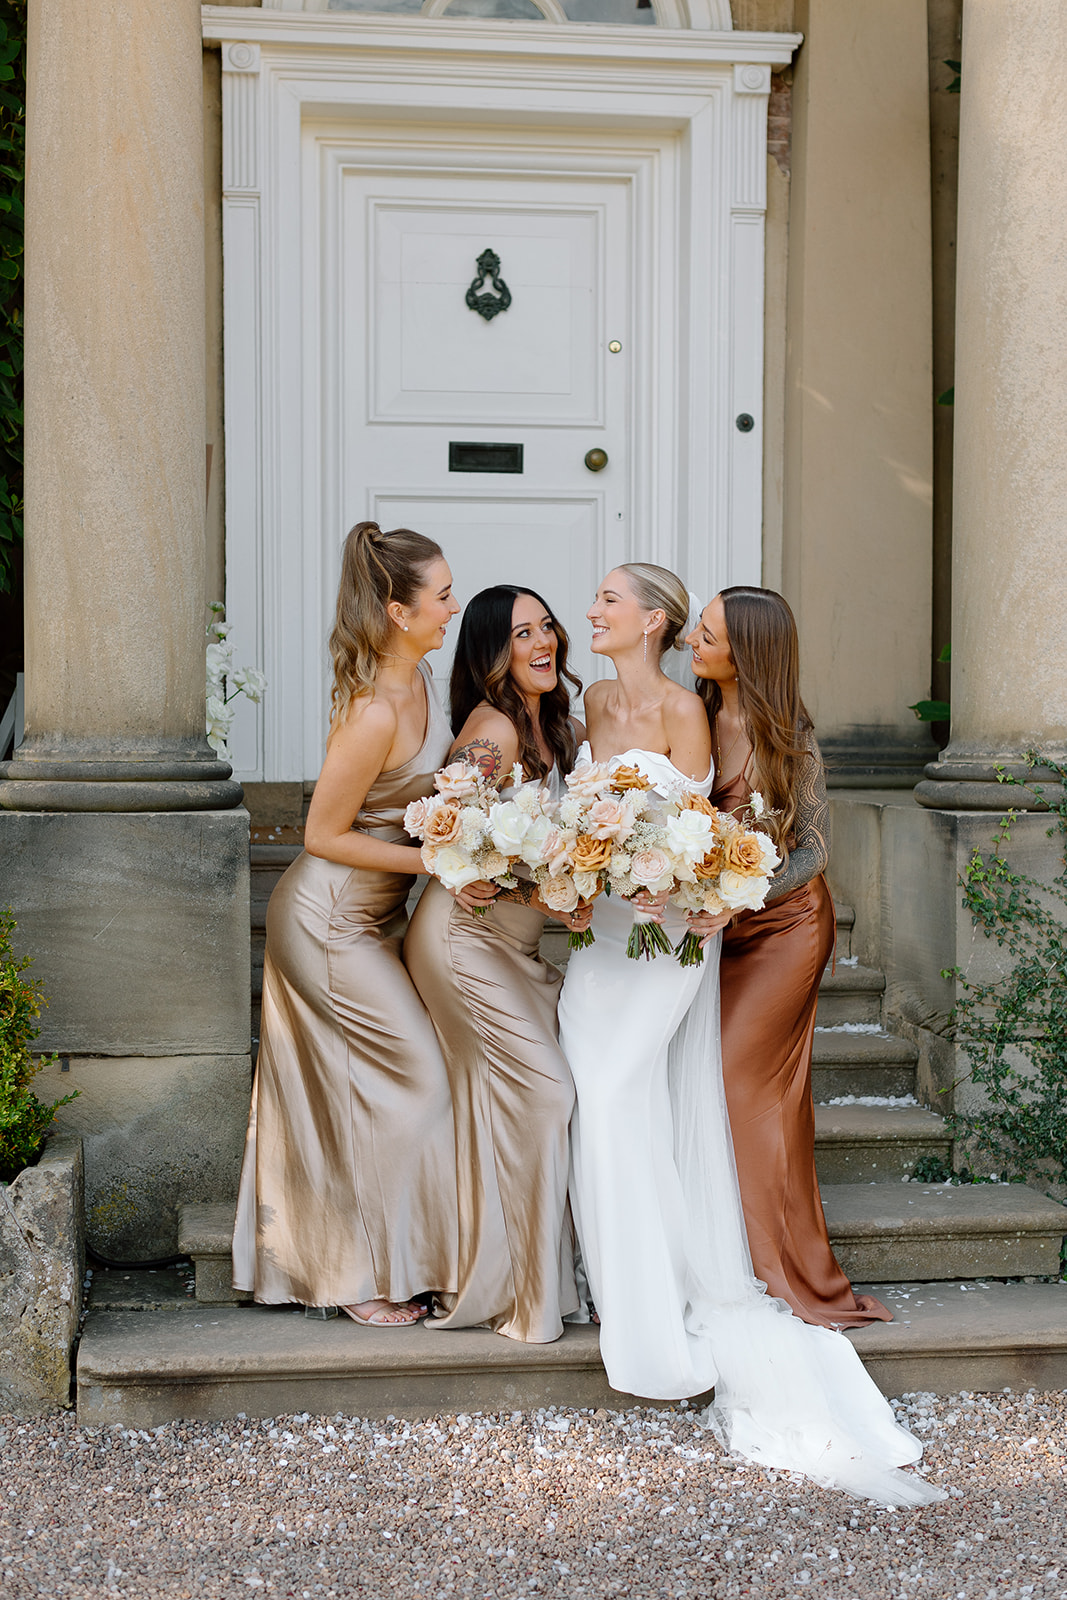 Serious September wedding glamour in this blush colour scheme wedding at Iscoyd Park by Alex Wysocki Photography